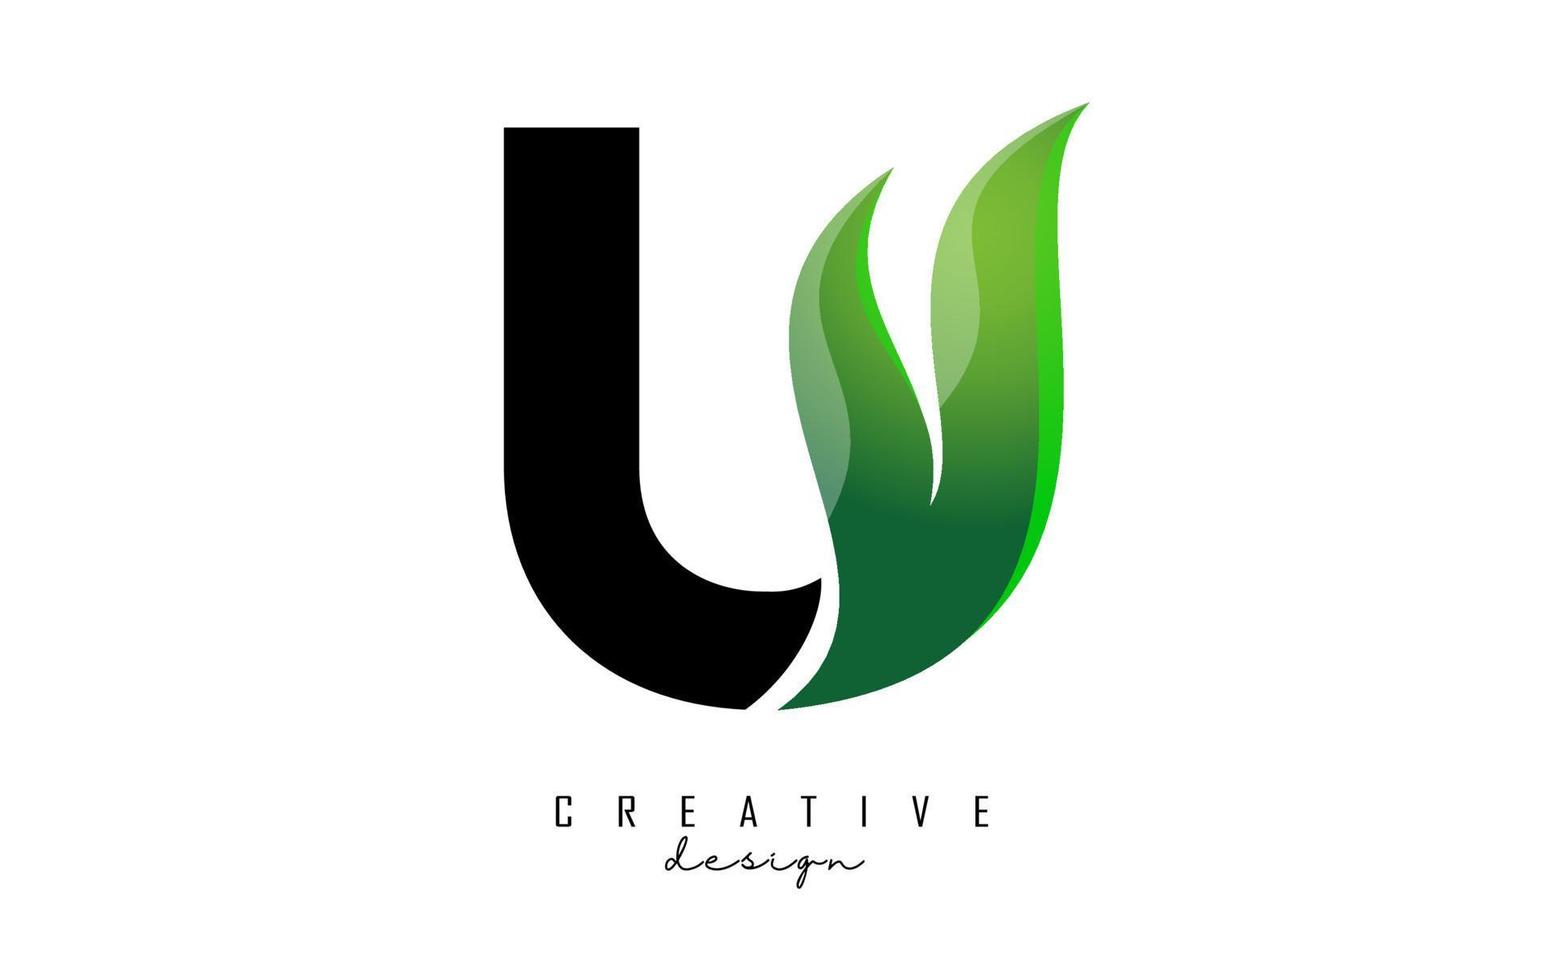 Vector illustration of abstract letter U with green leaf design.